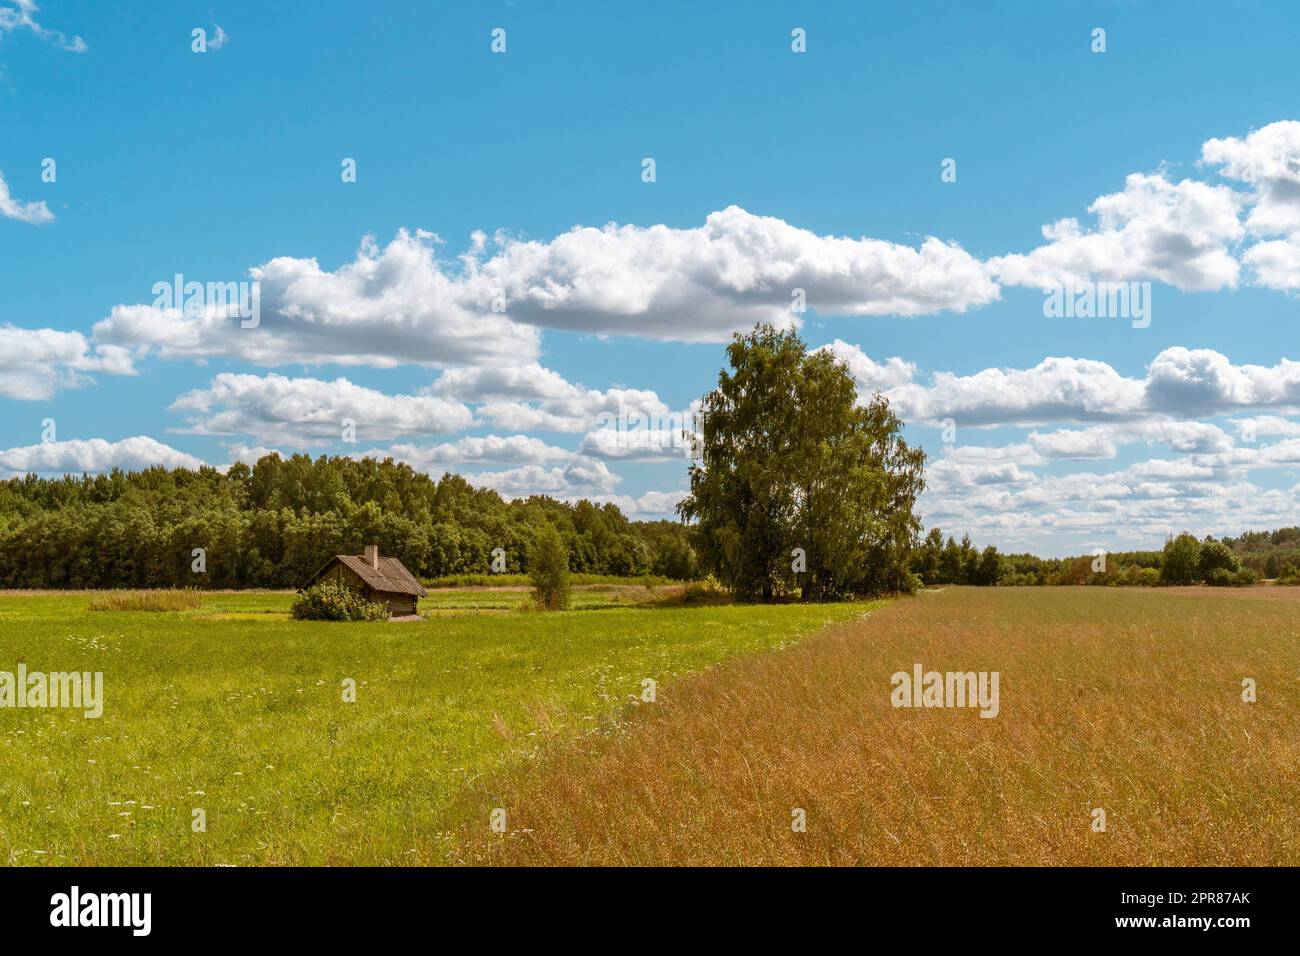 Small wooden house on farmland in forest field Stock Photo